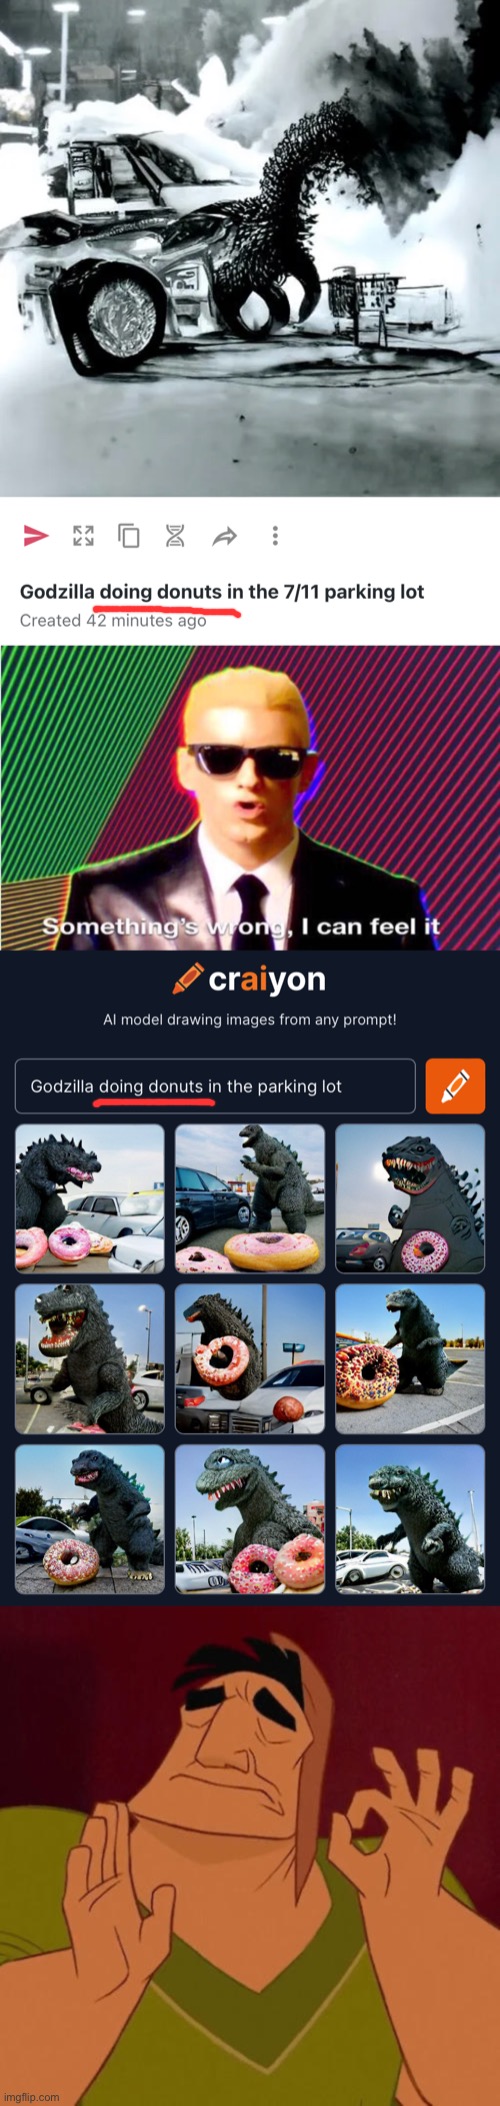 A take of two donuts | image tagged in godzilla doing donuts in the parking lot,ai,artificial intelligence | made w/ Imgflip meme maker